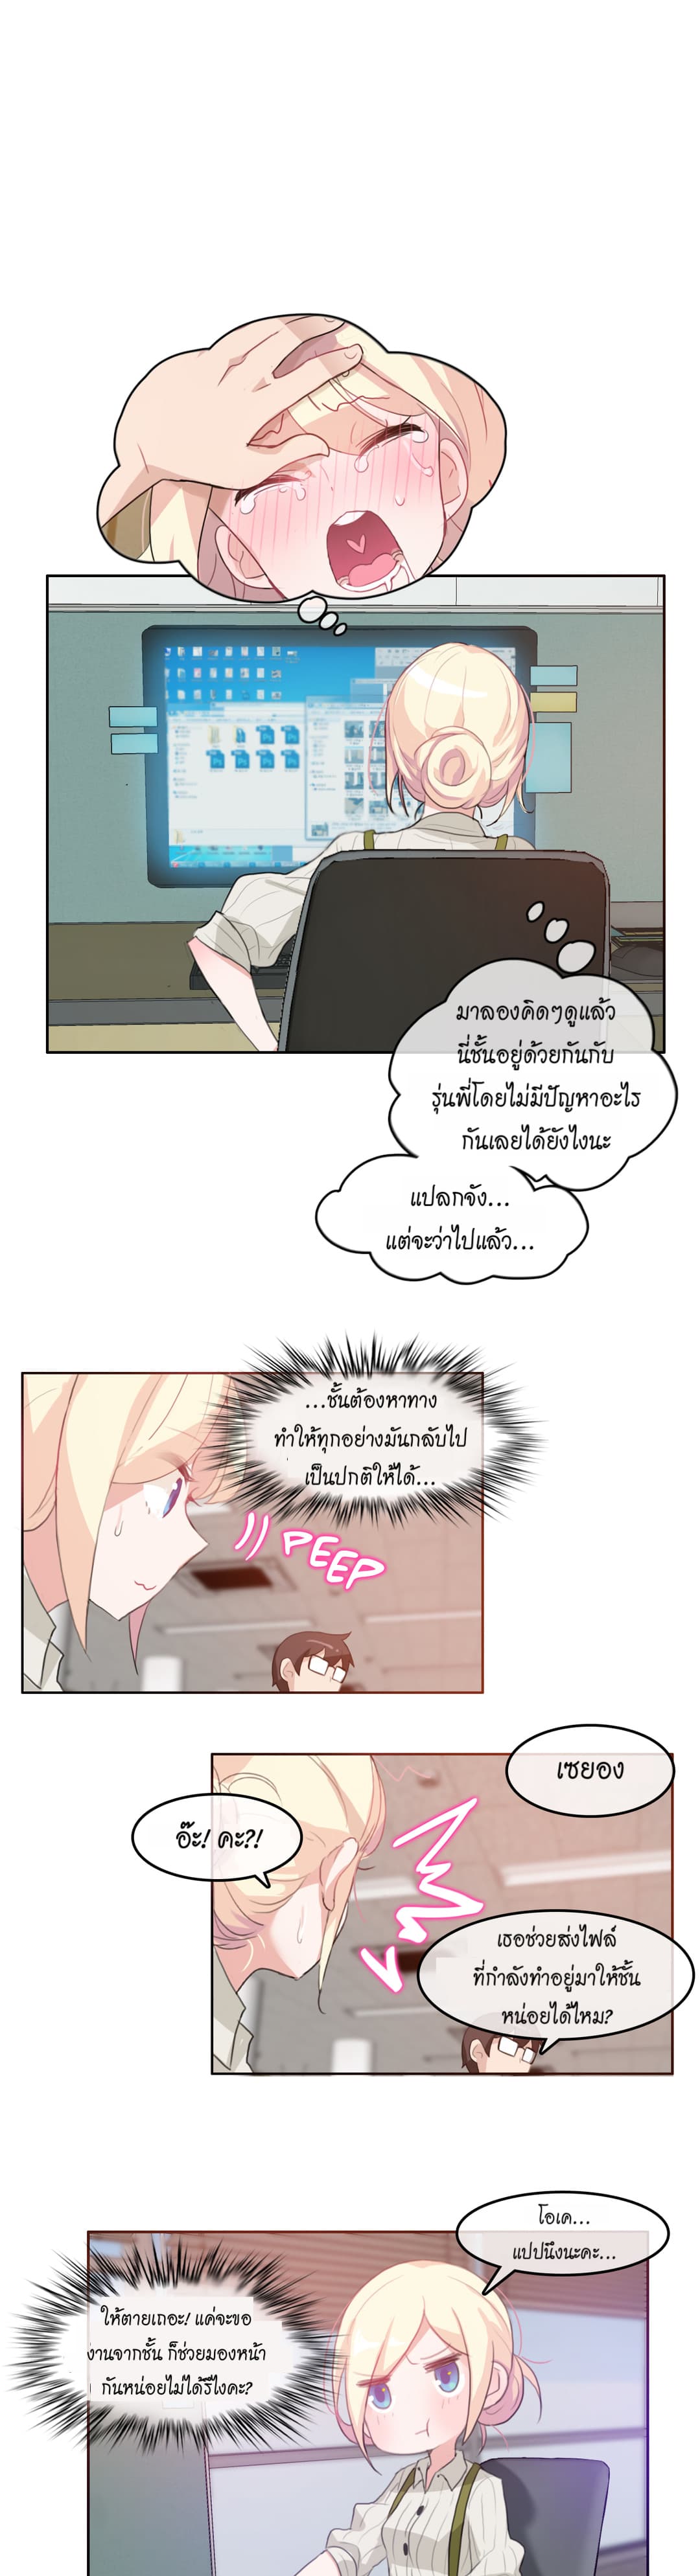 A Pervert’s Daily Life 8 (9)